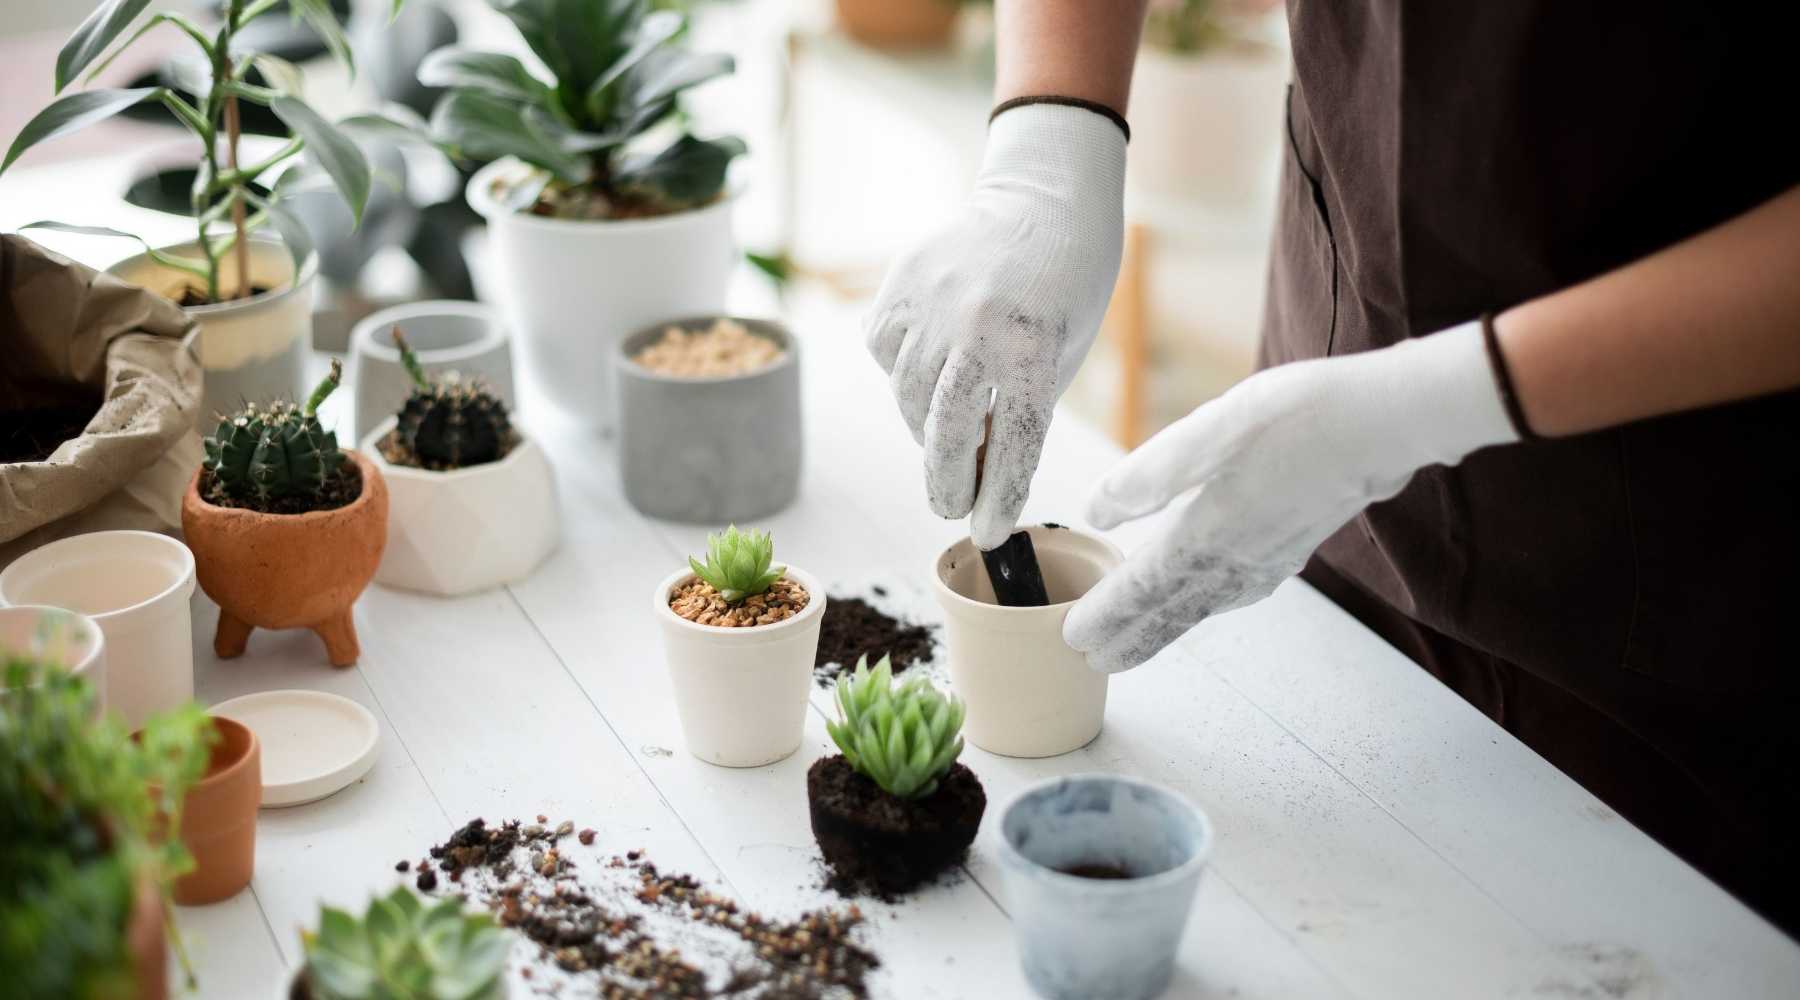 Indoor Plant Care: 9 Common houseplant mistakes to avoid - Failing to upgrade pots